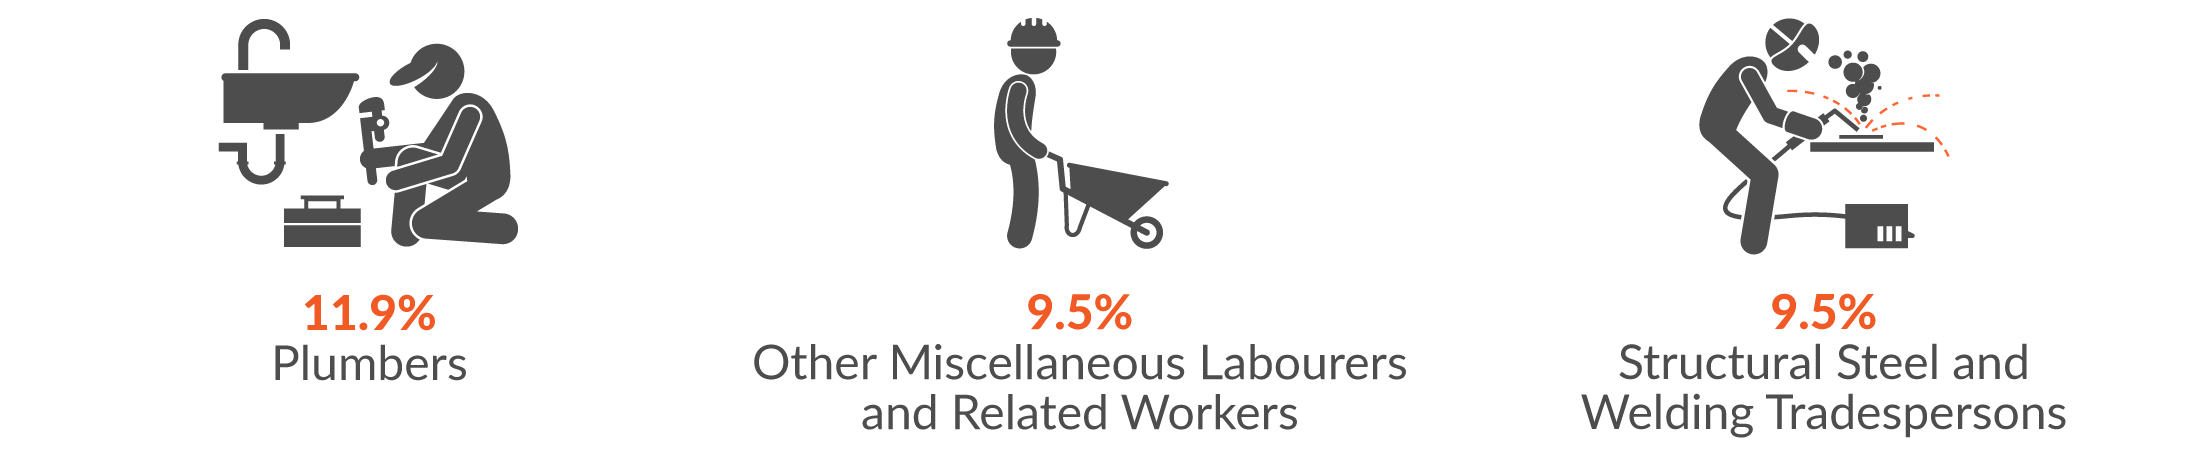 This infographic shows the main occupations by serious injury claims. 11.9% of Construction serious injury claims were made by a Plumber; 9.5% by Other Miscellaneous Labourers and Related Workers; and 9.5% by Structural Steel and Welding Tradespersons.